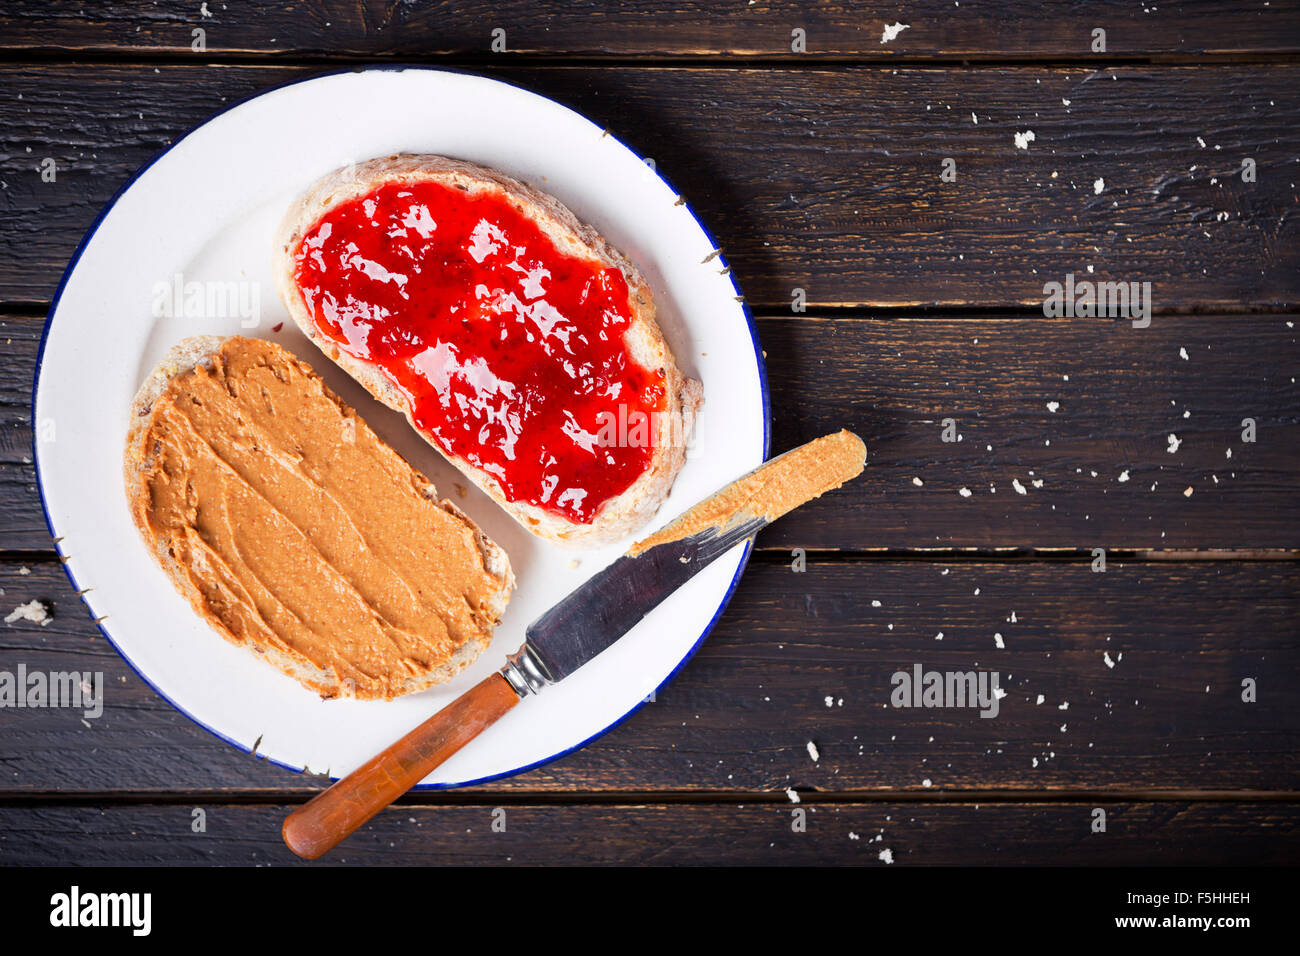 Peanut butter and jelly sandwich on a rustic table. Photographed from directly above. Stock Photo